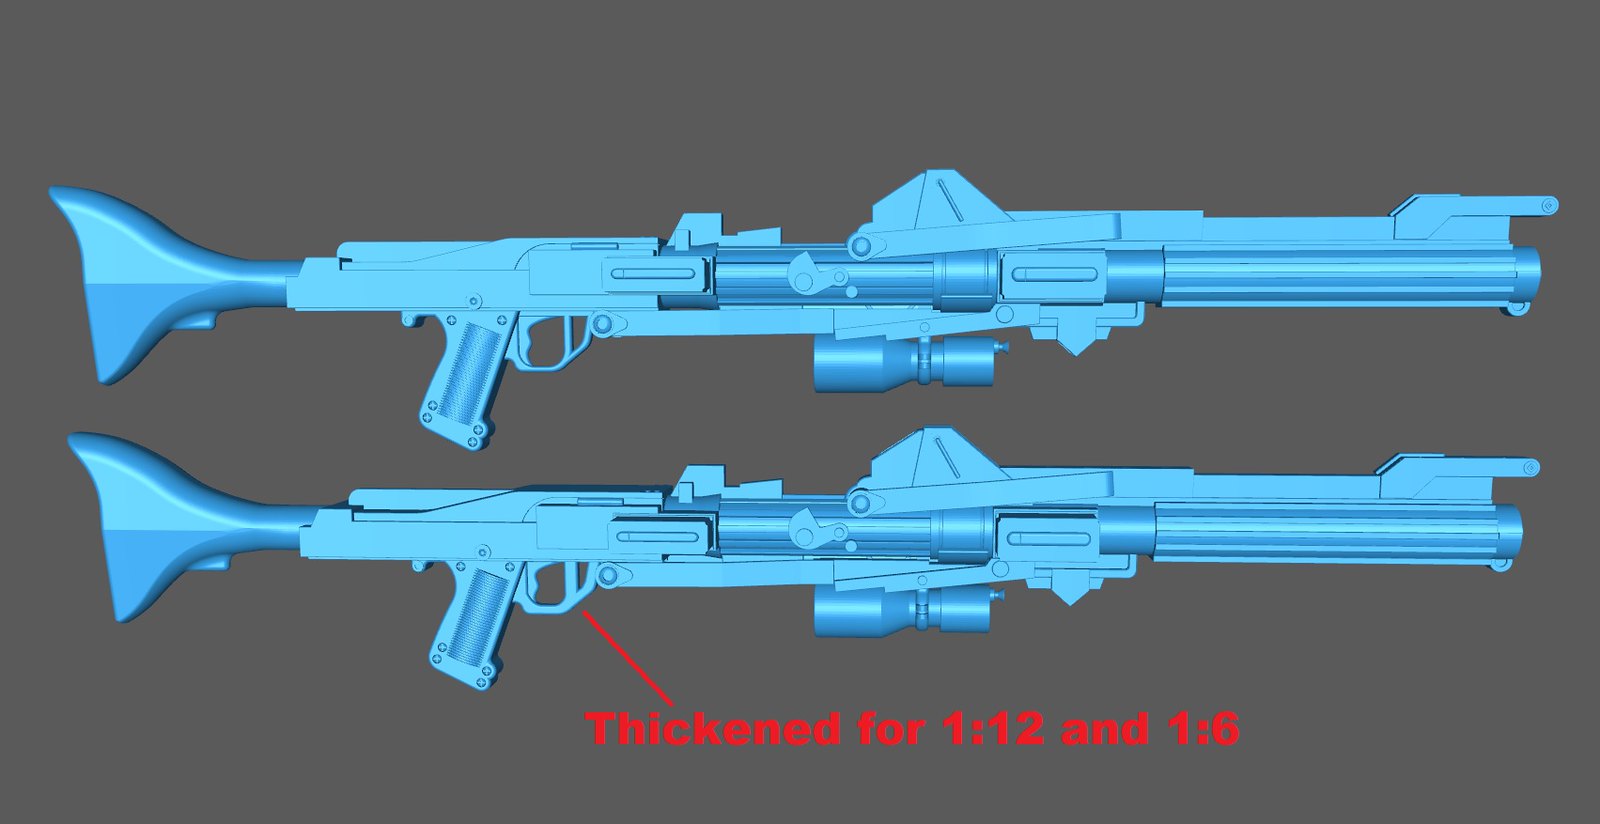 3D printable Star Wars parts and weapons for 1:6 figures (New models added, more updates in future) - Page 3 52702961883_80742d1065_h